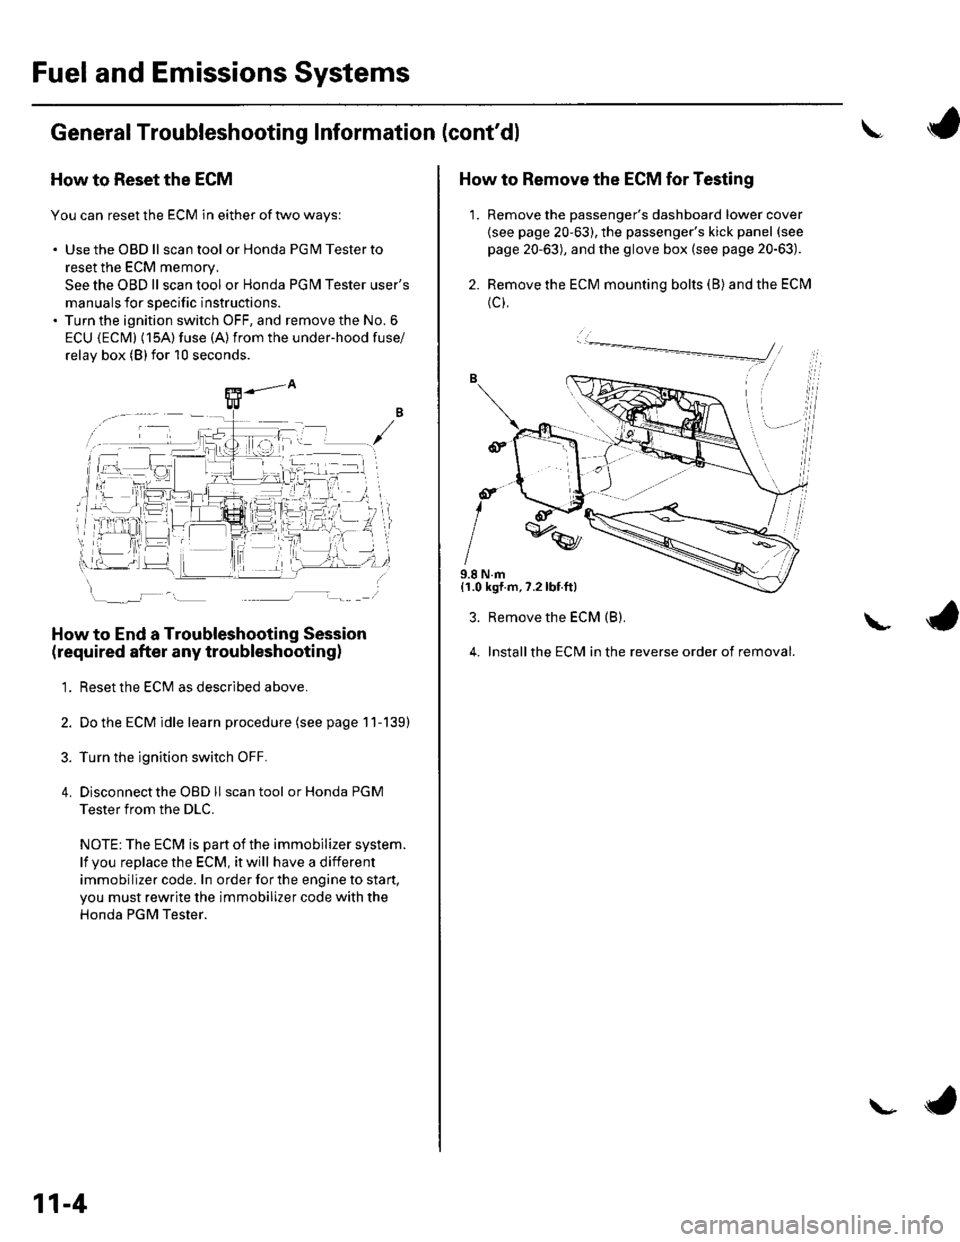 HONDA CIVIC 2003 7.G Workshop Manual Fuel and Emissions Systems
General Troubleshooting Information (contdl
How to Reset the ECM
You can reset the ECM in either of two ways:
. Use the OBD ll scantool or Honda PGMTesterto
reset the ECM m